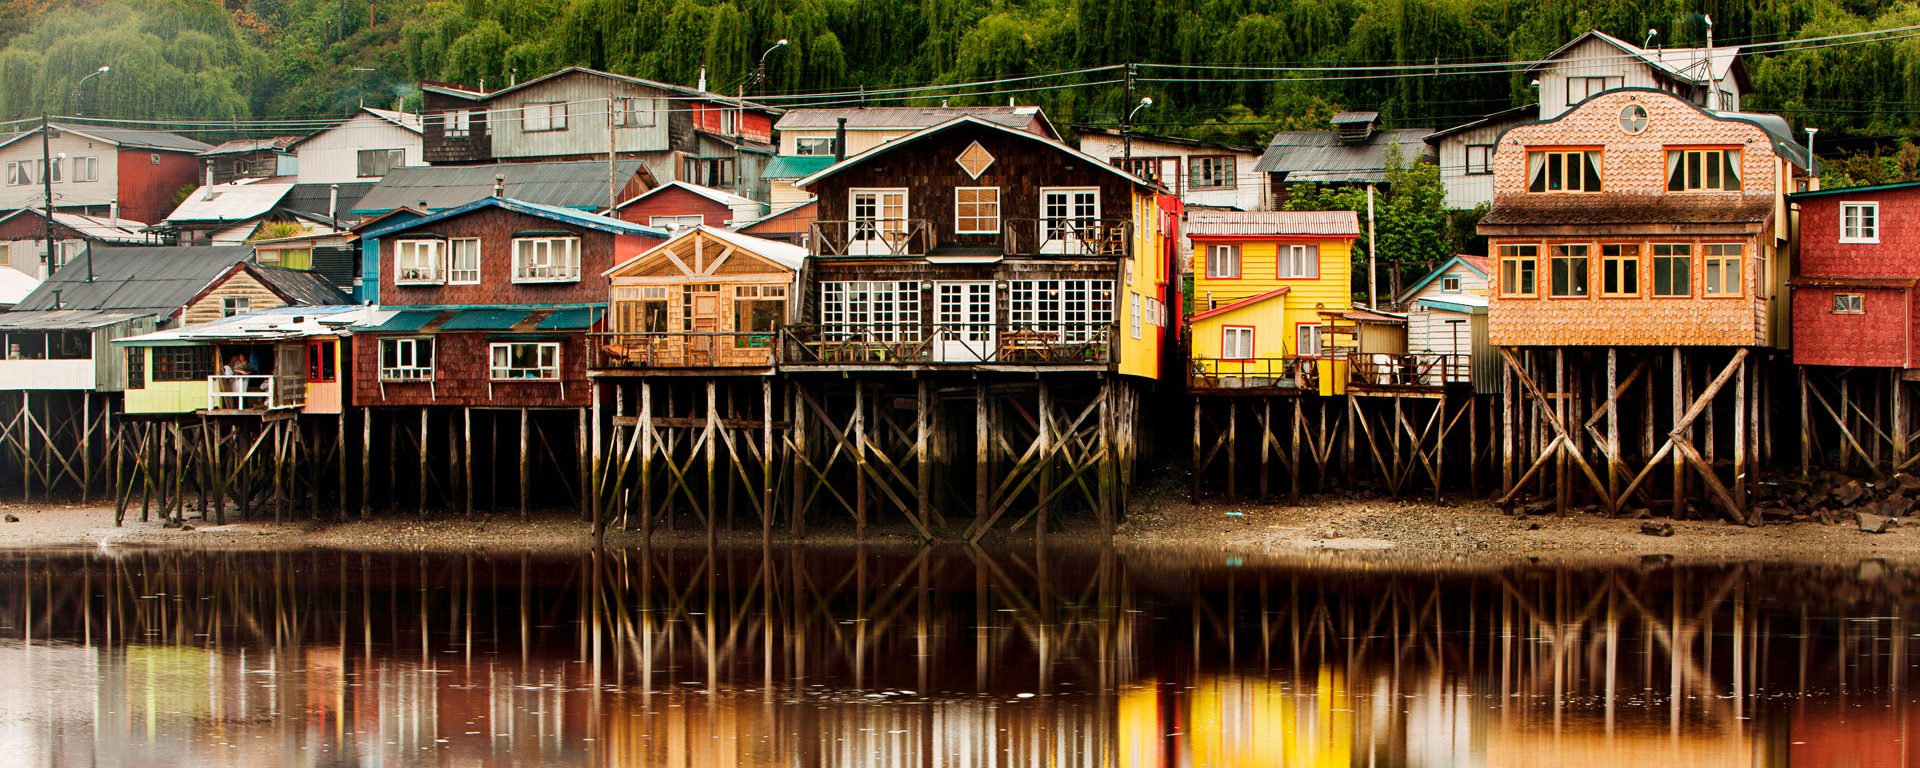 Palafito stilt houses in the tidal bay at Chiloe, Patagonia, Chile